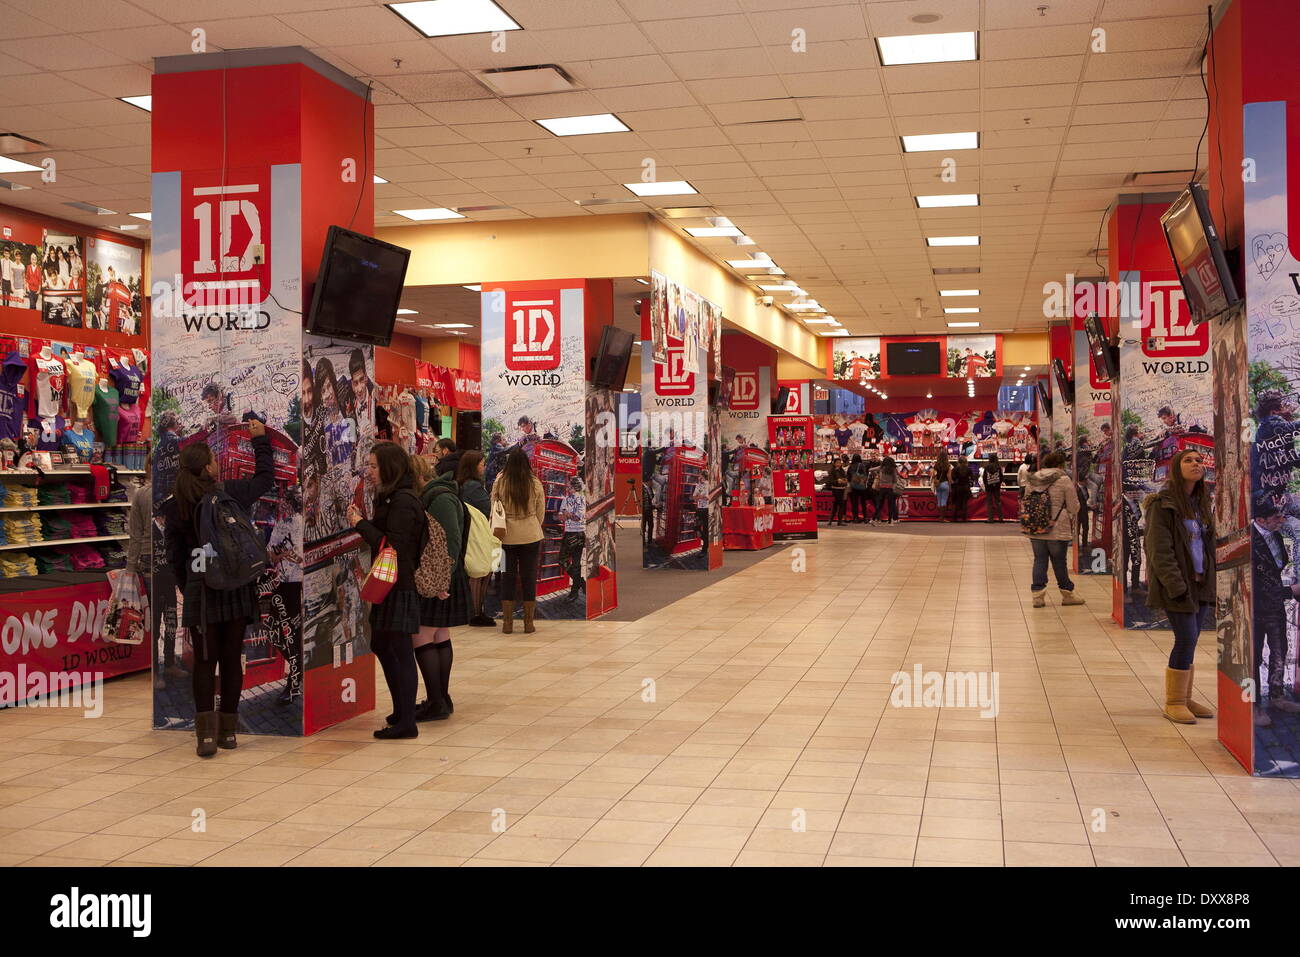 One Direction fans visit the new '1D World' Pop Up Store where they can  purchase merchandise and write messages to their favorite band member  throughout the store Featuring: One Direction fans visit